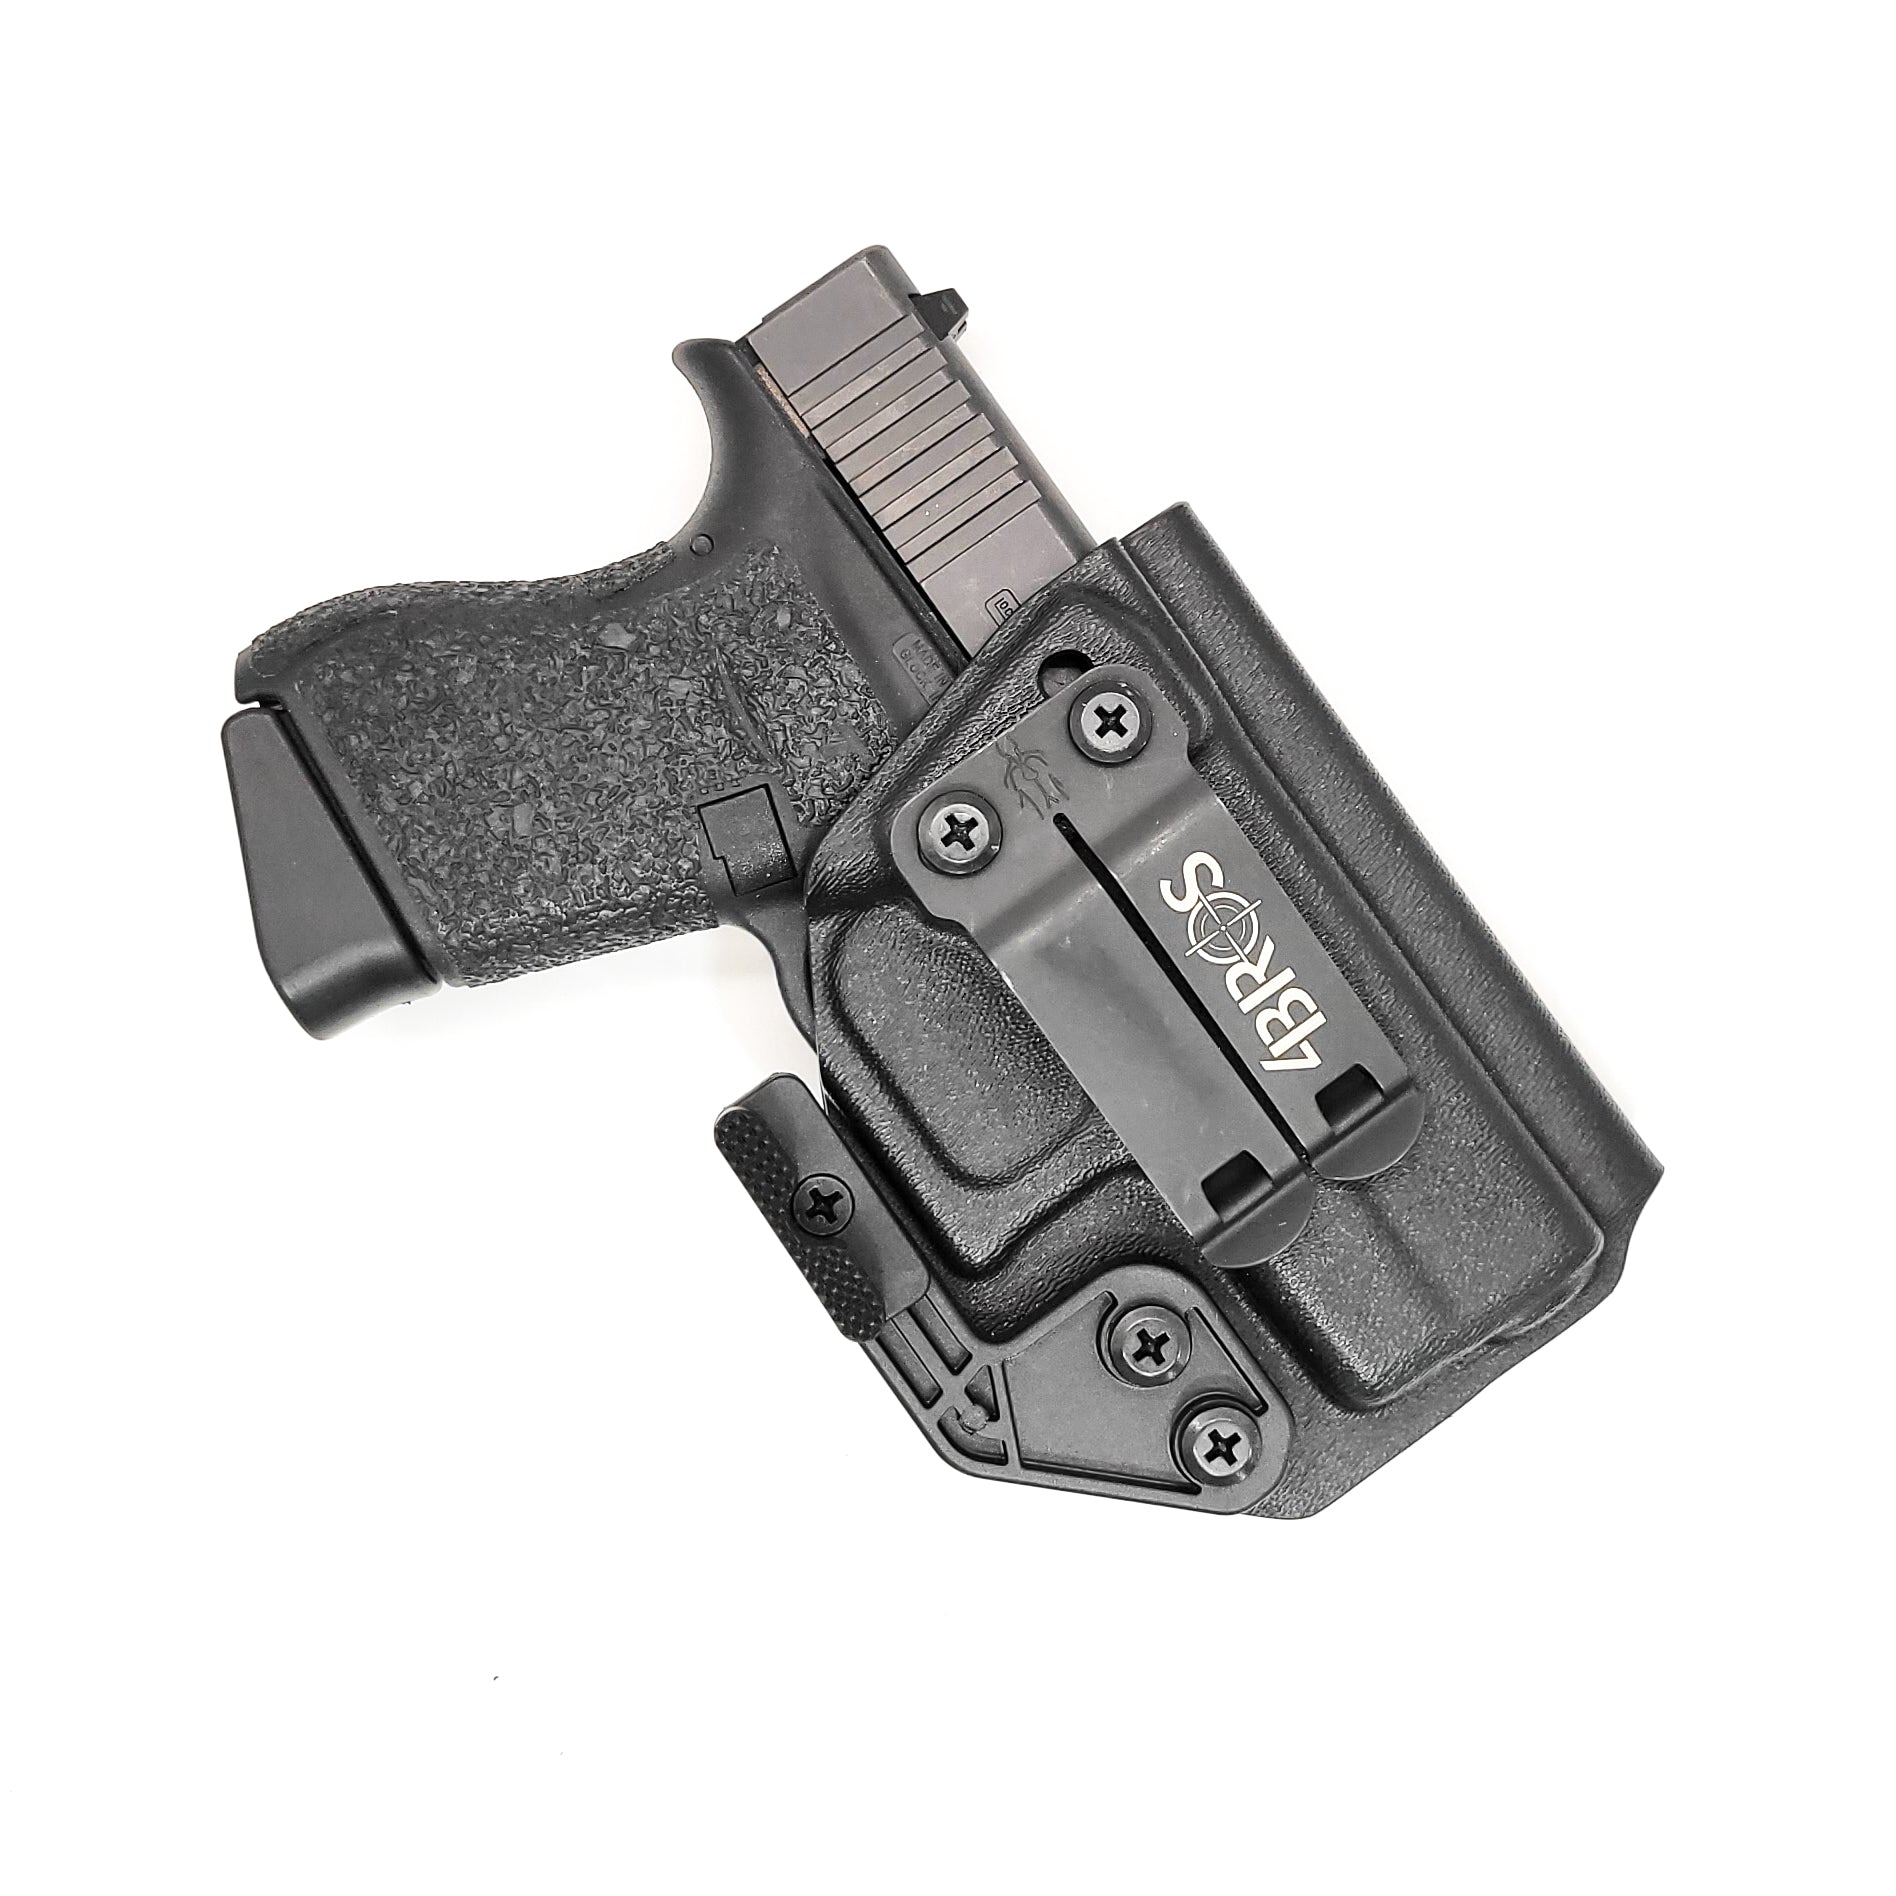 Inside Waistband Holster designed to fit the Glock 43 and 43X pistols with adjustable retention and High Sweat shield. Holster comes with a 1.5" FOMI Belt attachment and optional Modwing that includes 2 inserts to allow user to adjust the amount of leverage placed against the inside of the belt to reduce printing 